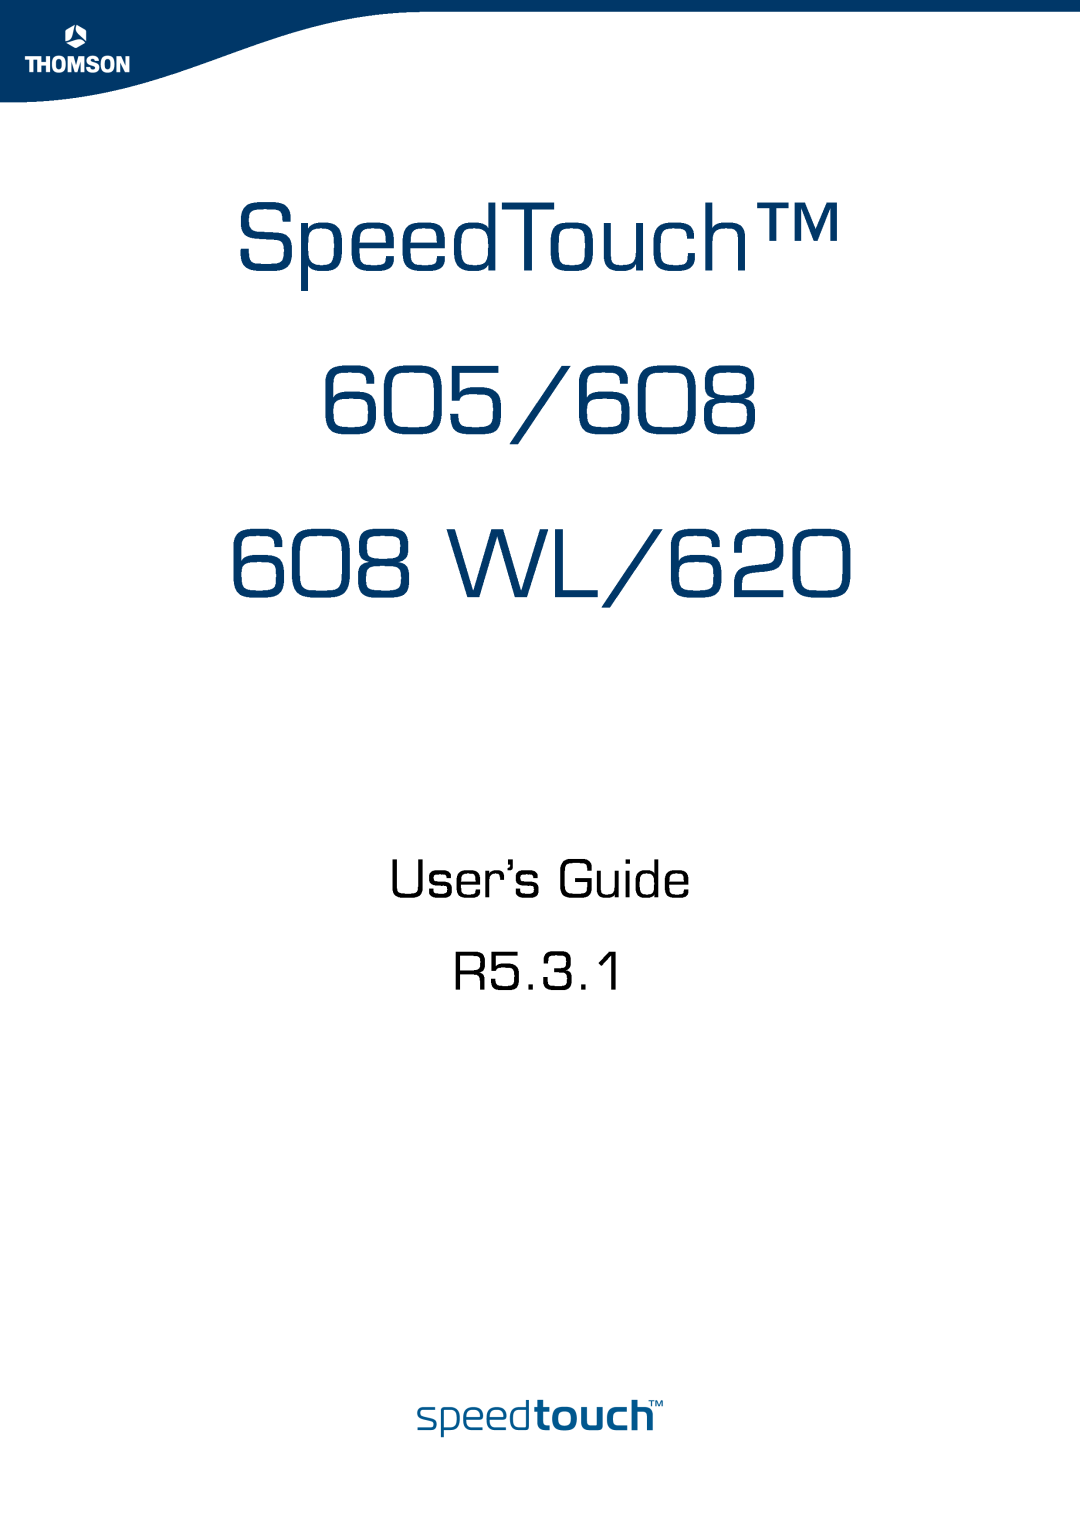 Technicolor - Thomson manual SpeedTouch 605/608 608 WL/620, User’s Guide R5.3.1 